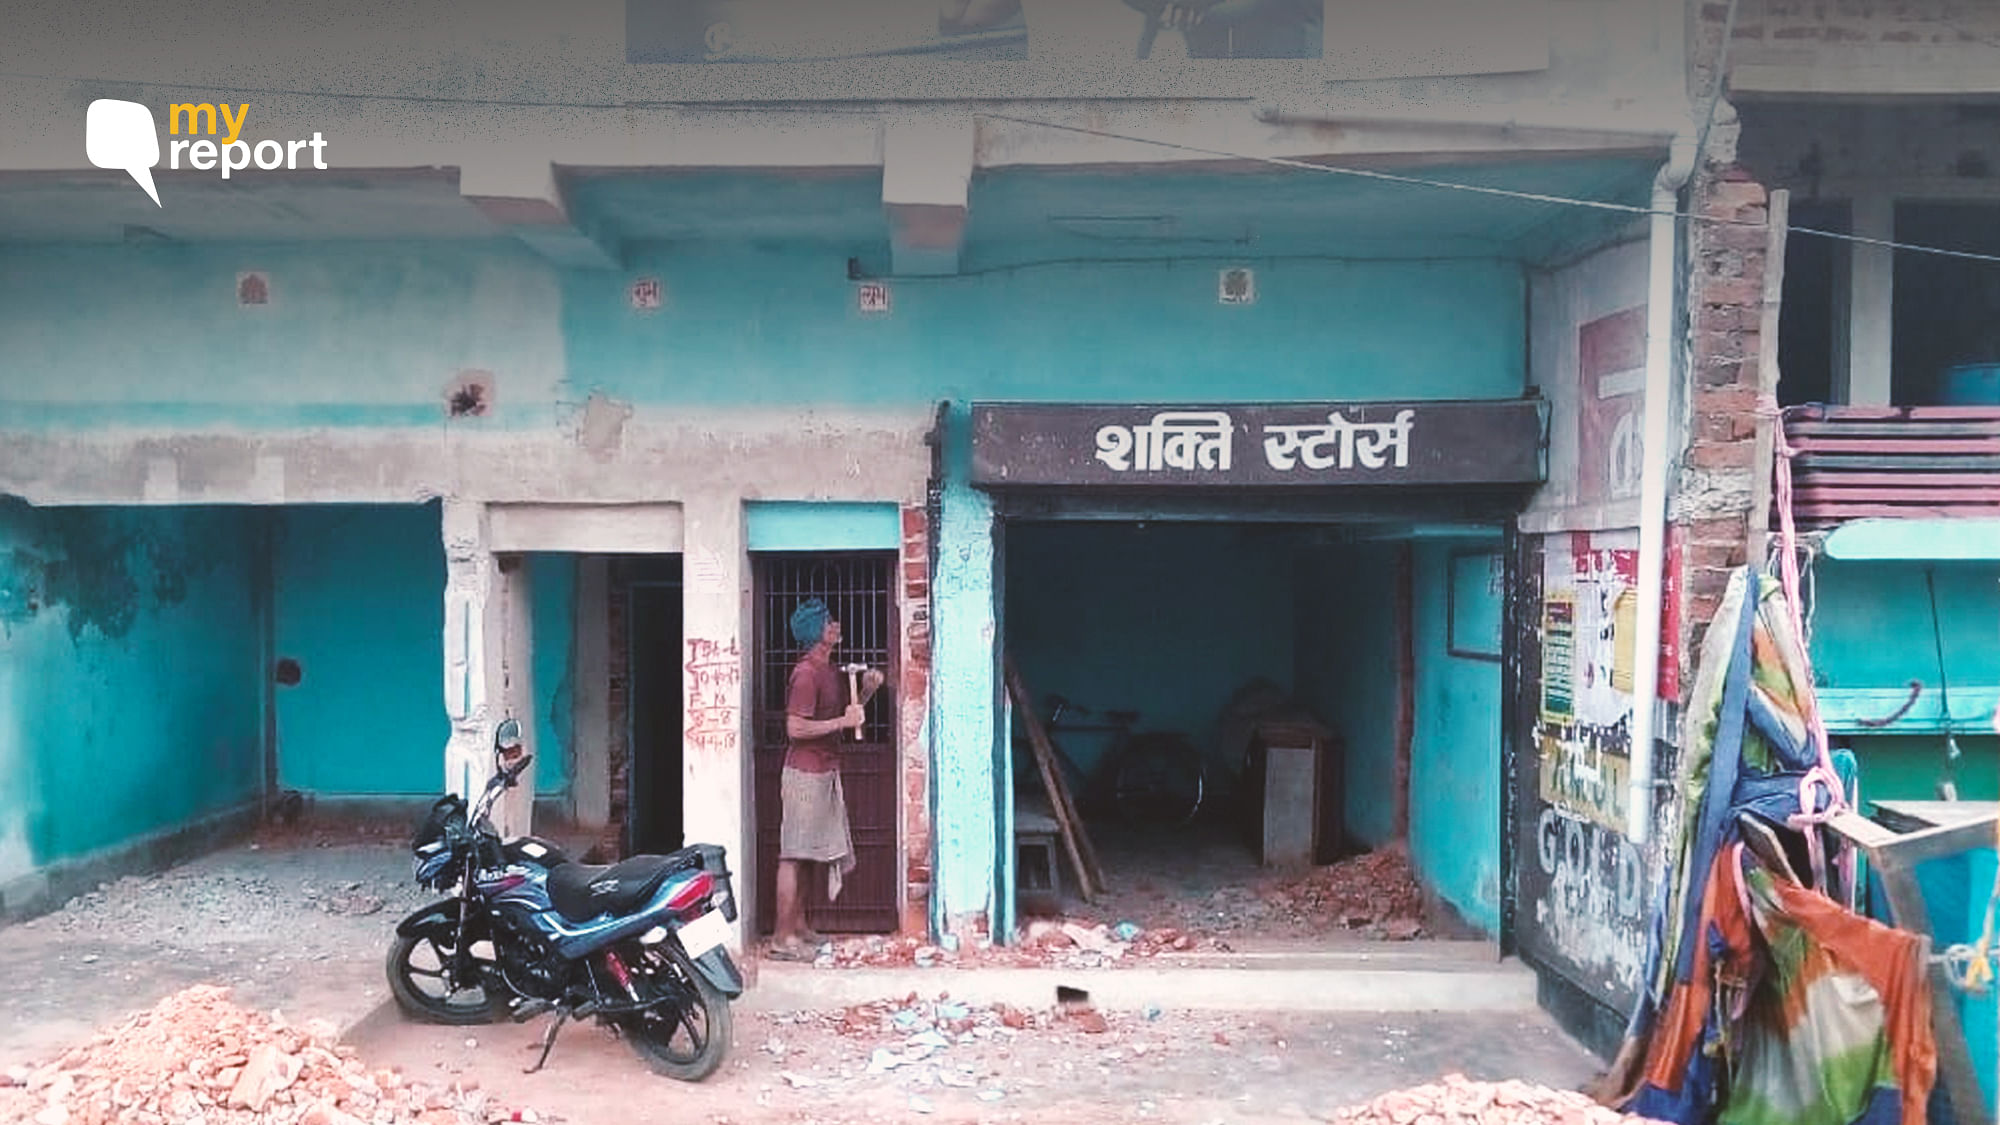 The government has demolished houses along NH-2 in Jharkhand’s Hazaribagh, without compensation to those who have been residing there for generations.